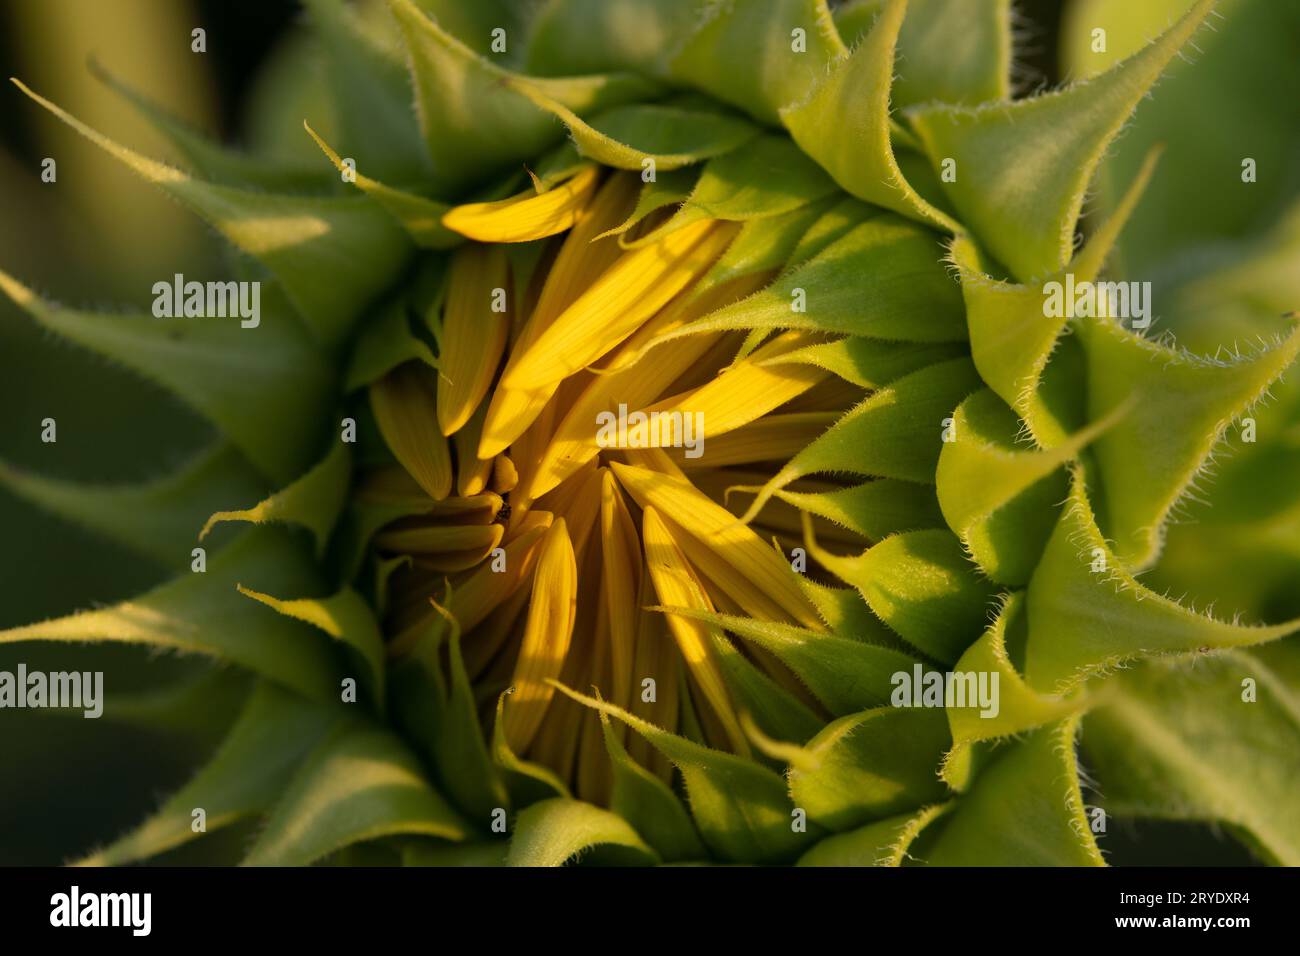 Macro close-up image of a sunflower about to bloom with rays of sun hitting the leaves Stock Photo